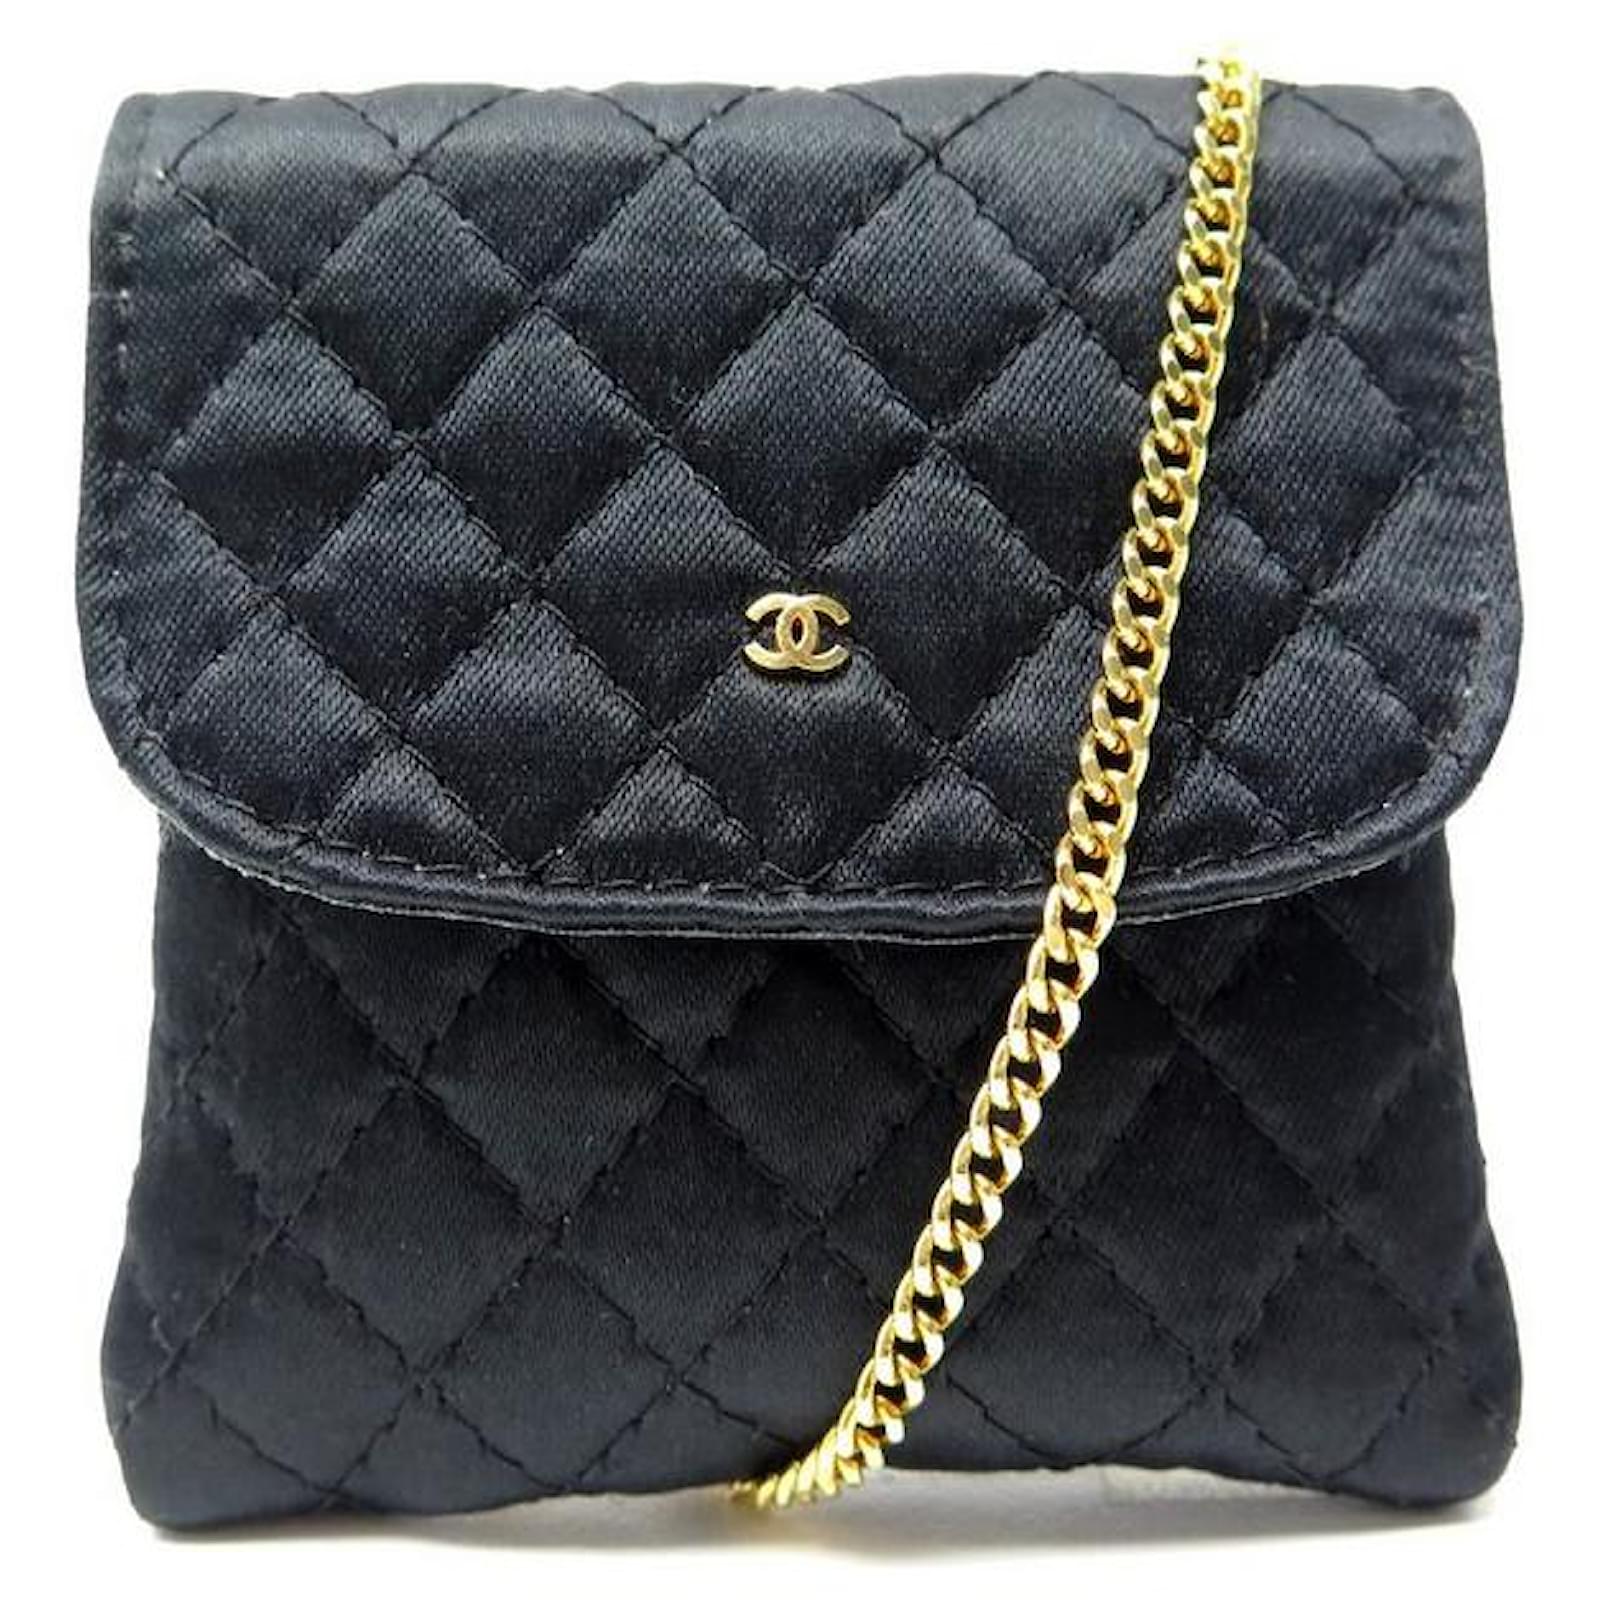 VINTAGE CHANEL MINI BAG COLLIER TIMELESS BLACK SATIN FLAP WITH